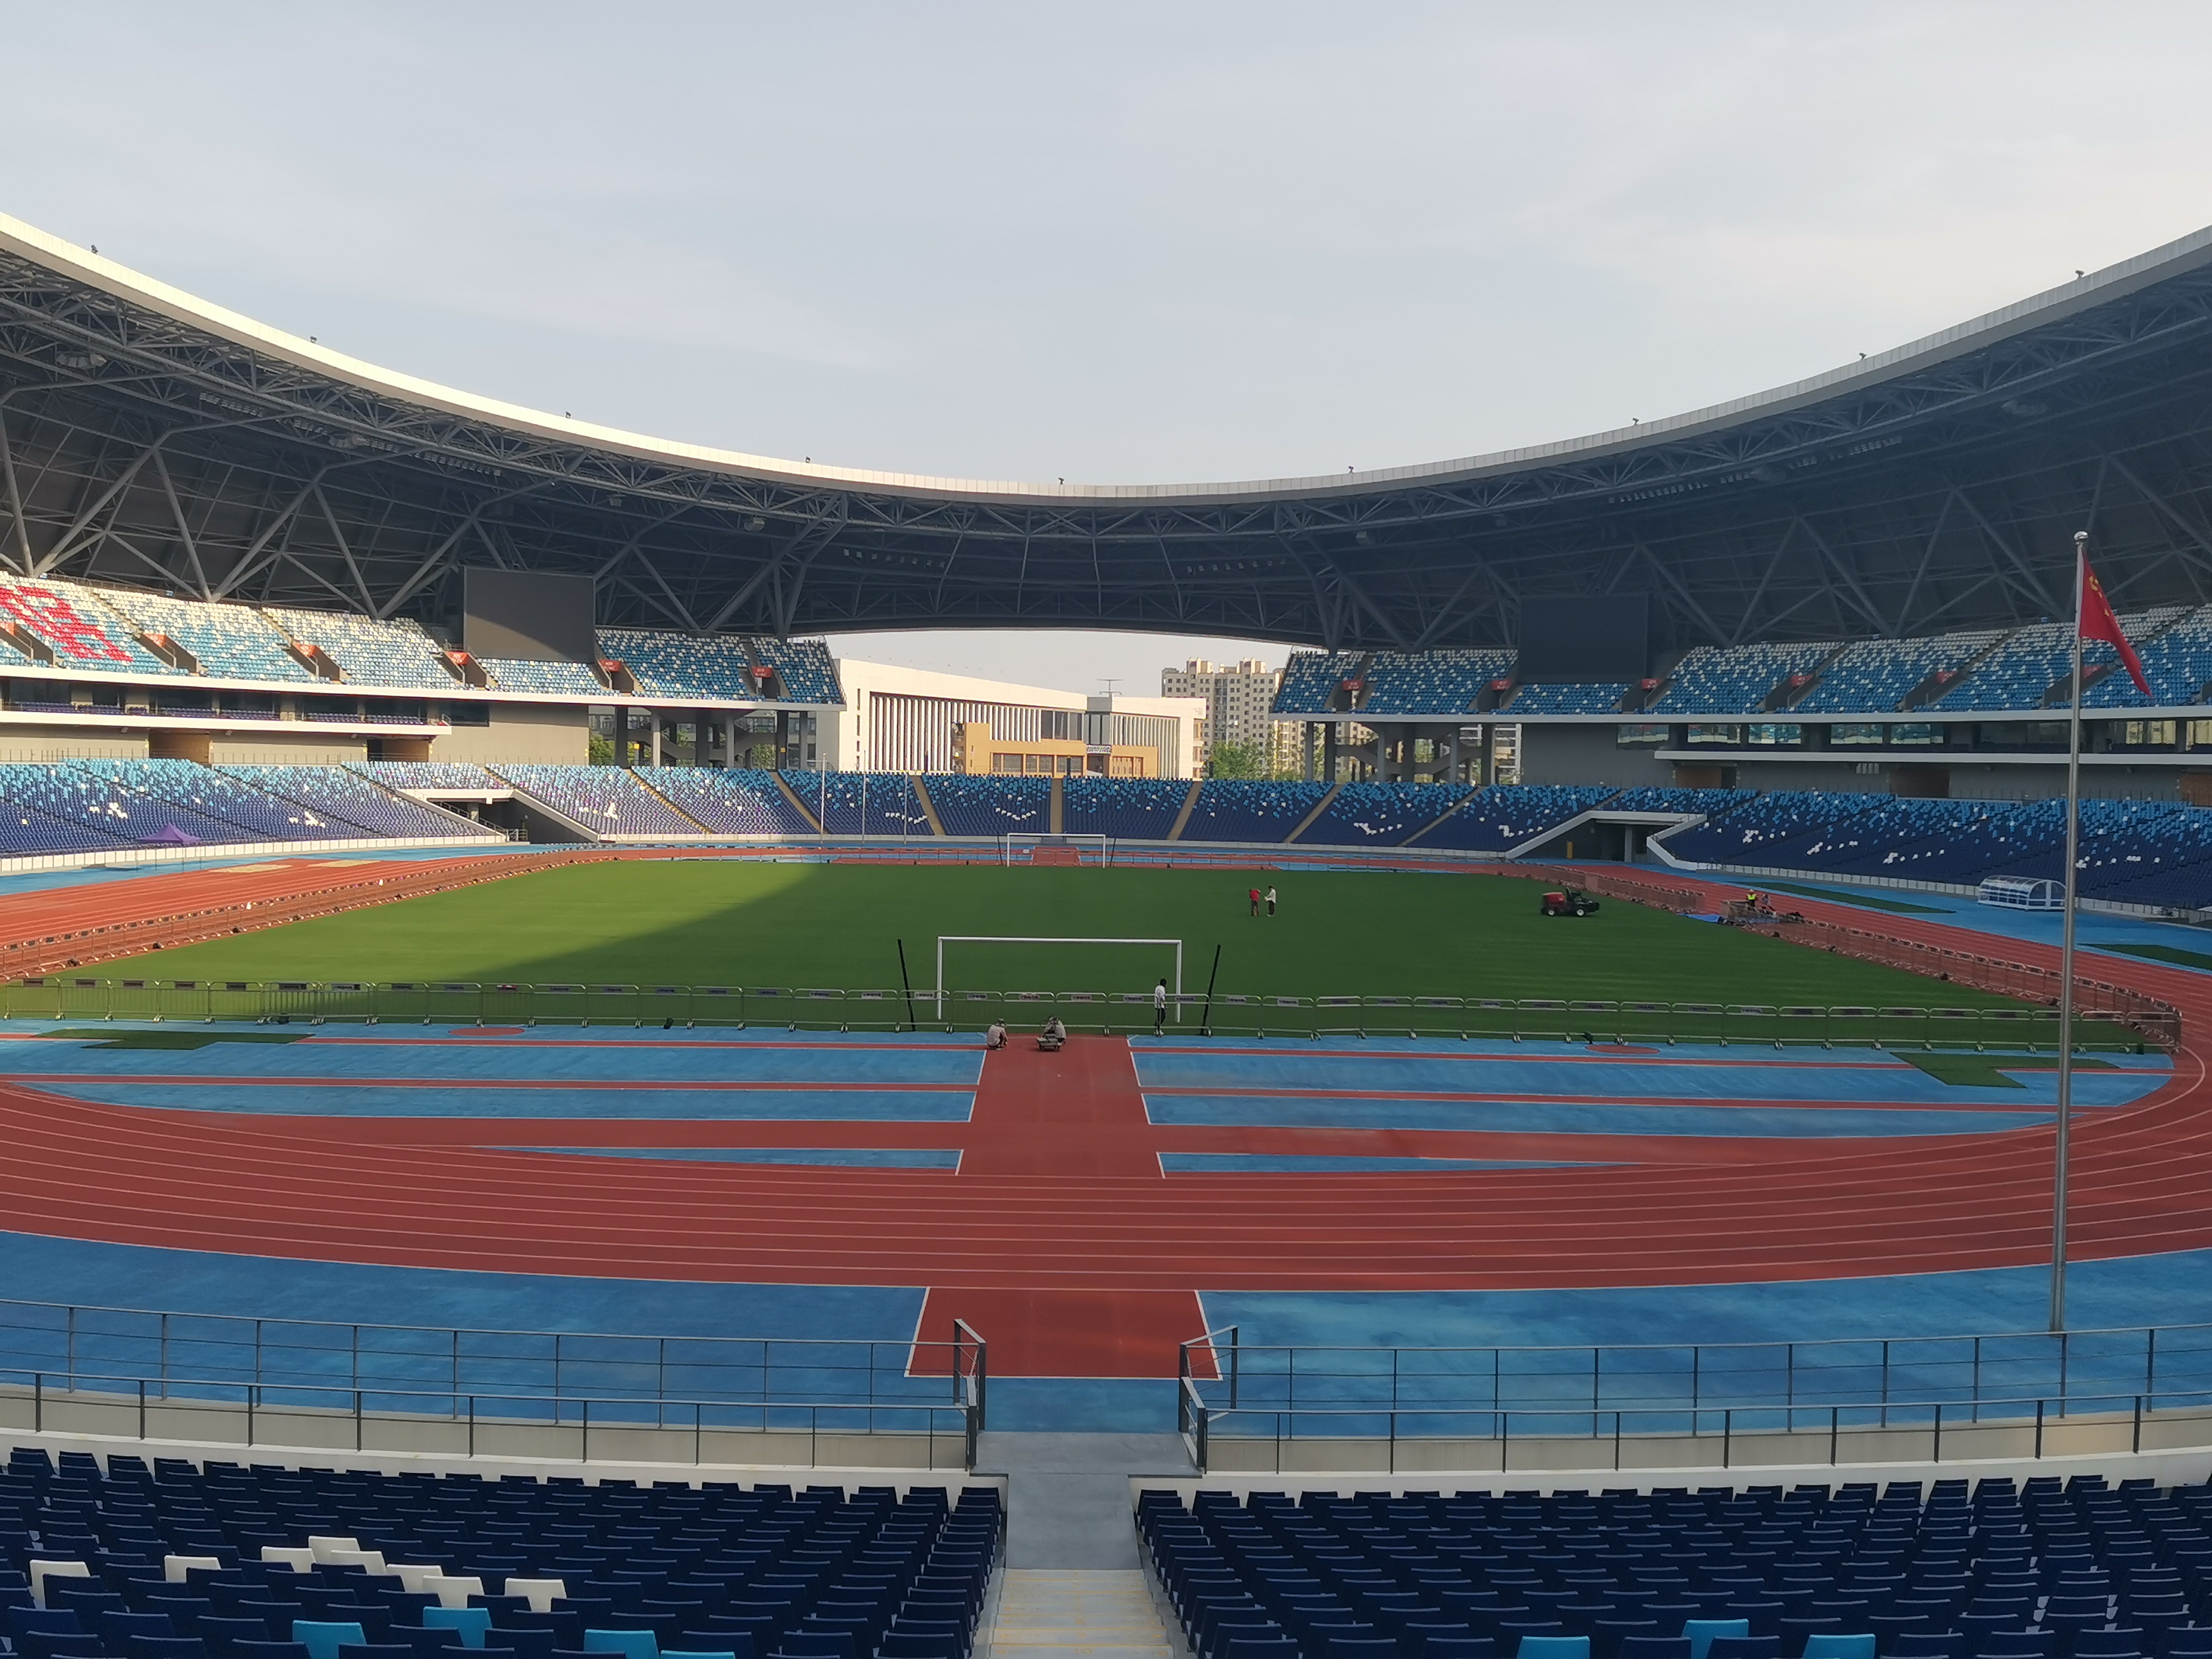 Asian Games' football venue well-prepared with natural turf